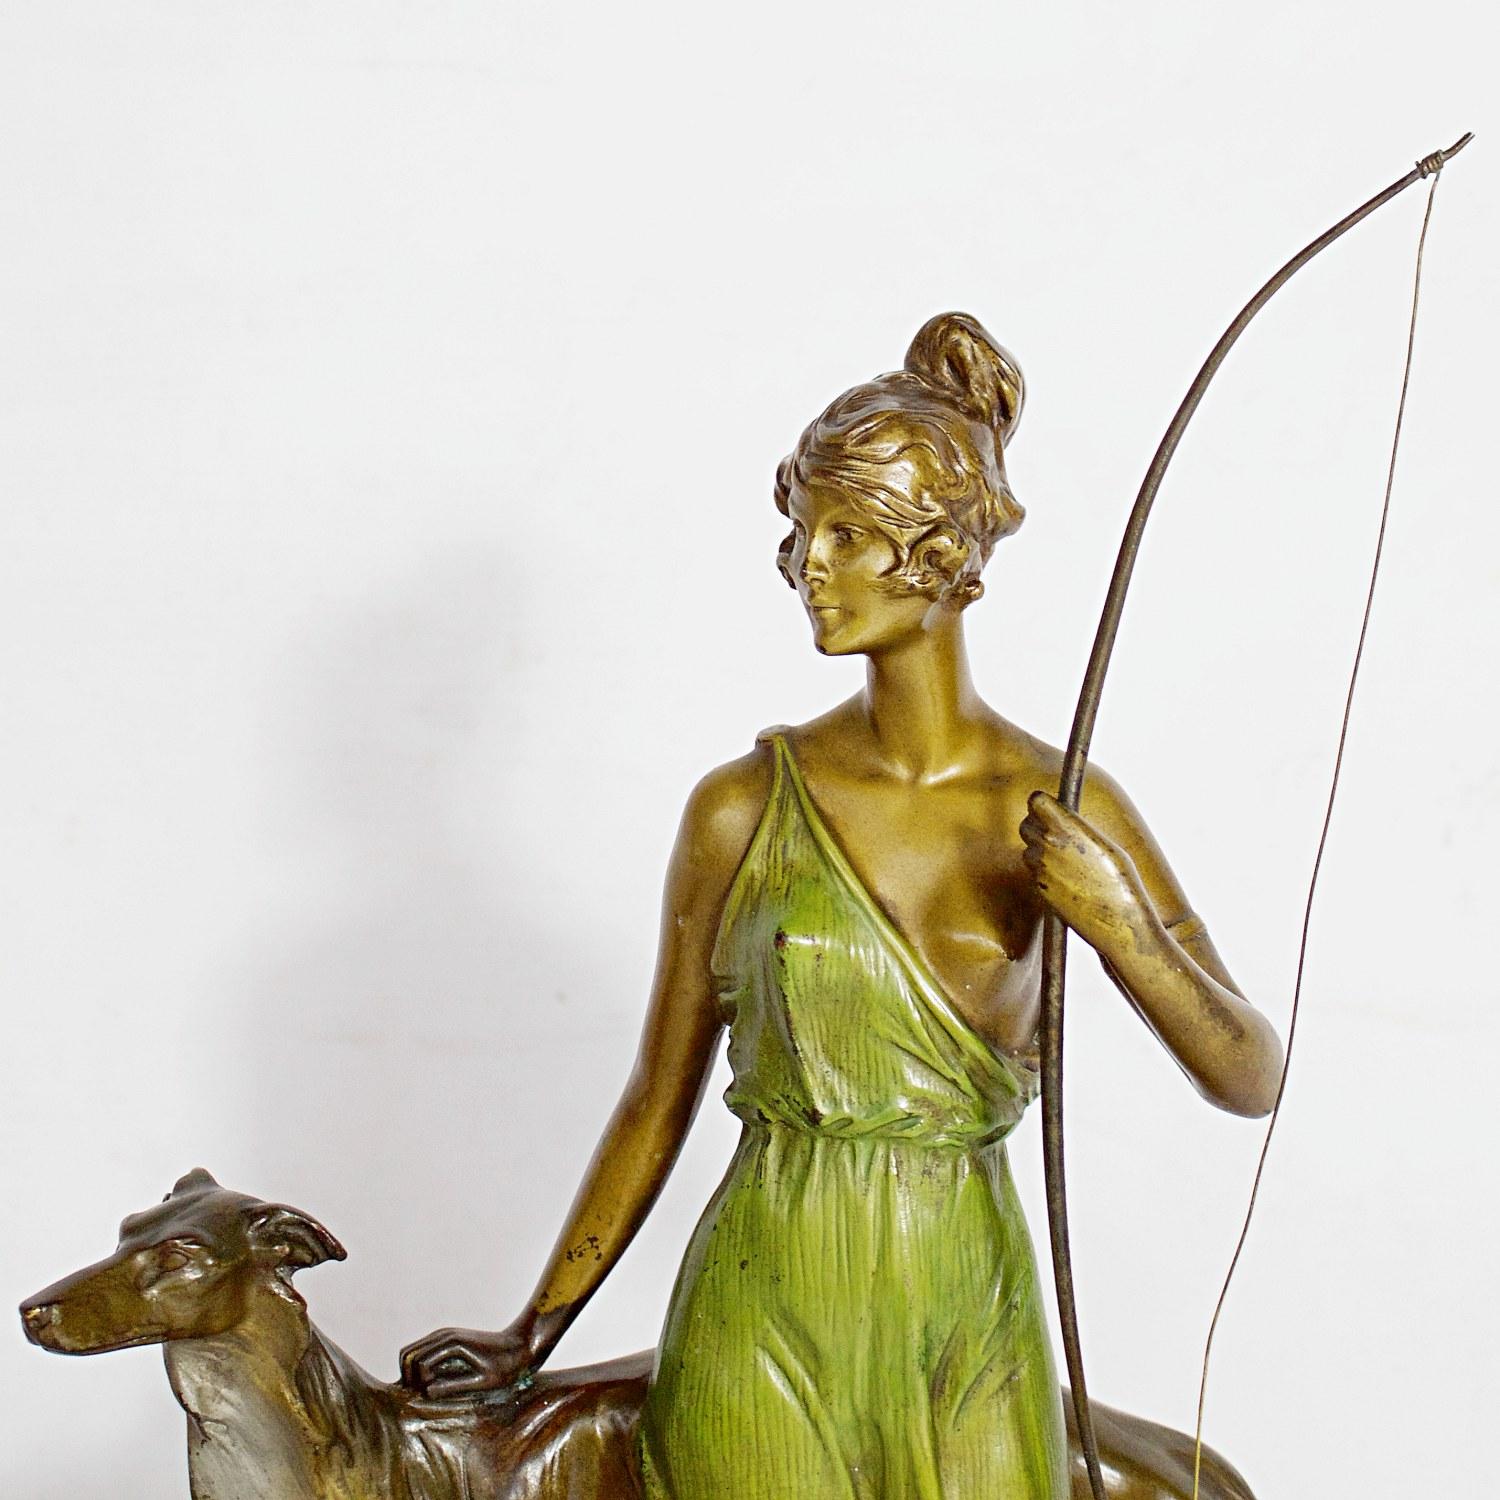 'Diana the Huntress' an Art Deco bronze sculpture by Bruno Zach depicting Diana huntress on the hunt with her loyal companion at her side. Green patinated dress and original patination. Set over a marble base. Signed 'Zach' to bronze.

Literature: